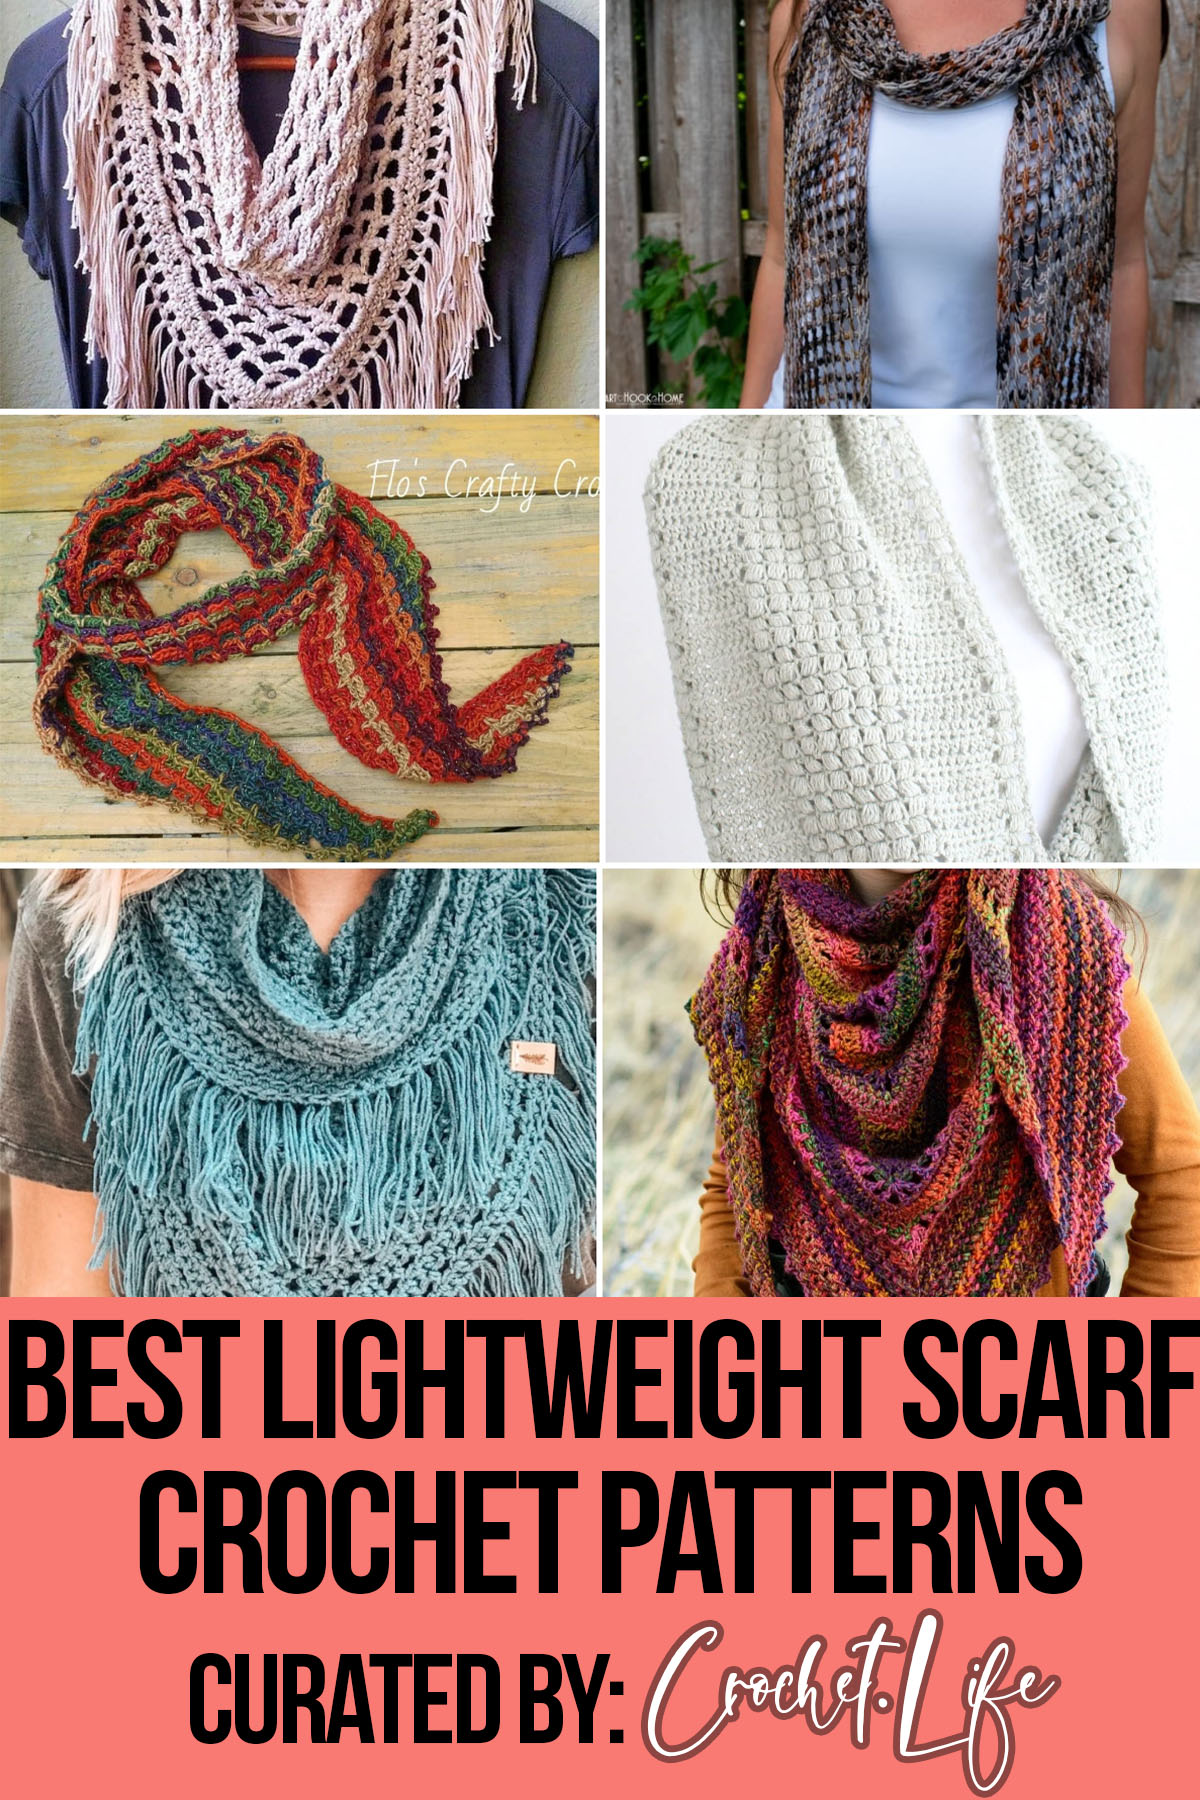 photo collage of crochet patterns for a lightweight scarf with text which reads best lightweight scarf crochet patterns curated by crochet.life